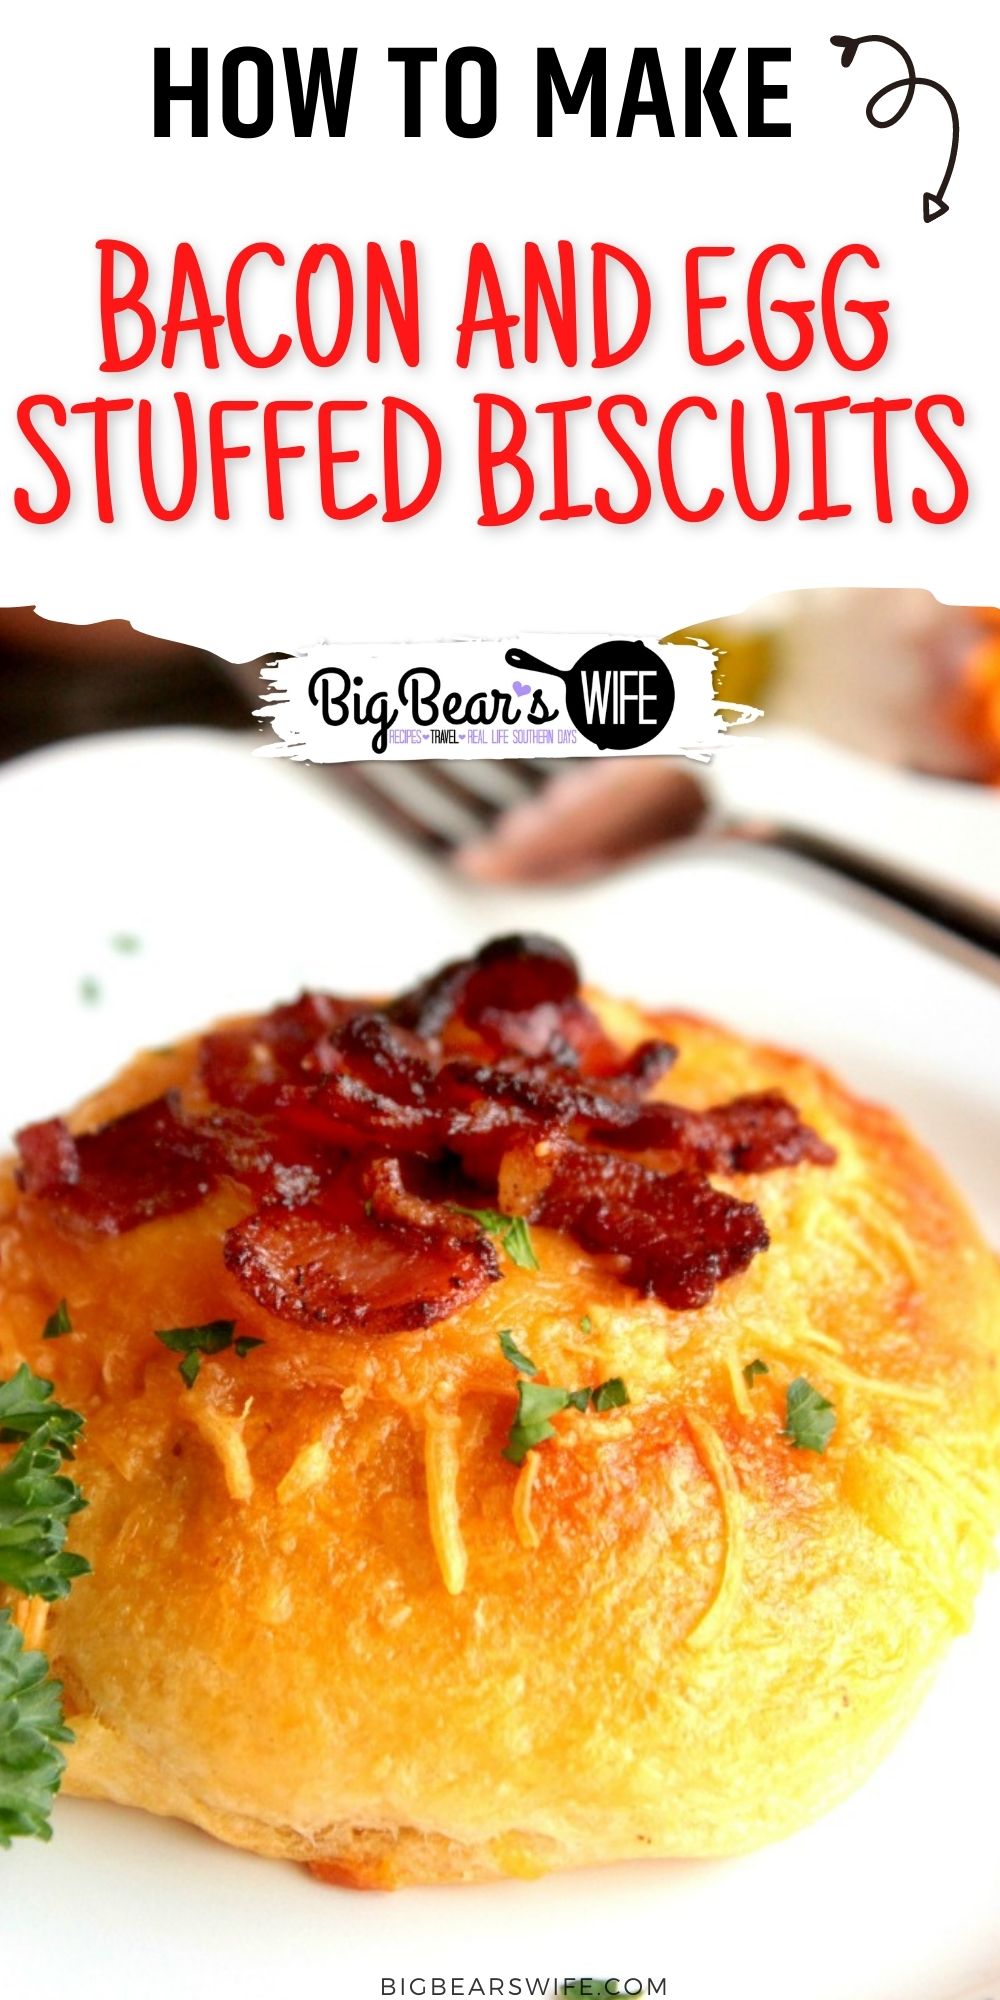 Bacon and Egg Stuffed Biscuits are easy breakfast biscuits stuffed with scrambled eggs, cheddar cheese and crispy bacon. via @bigbearswife